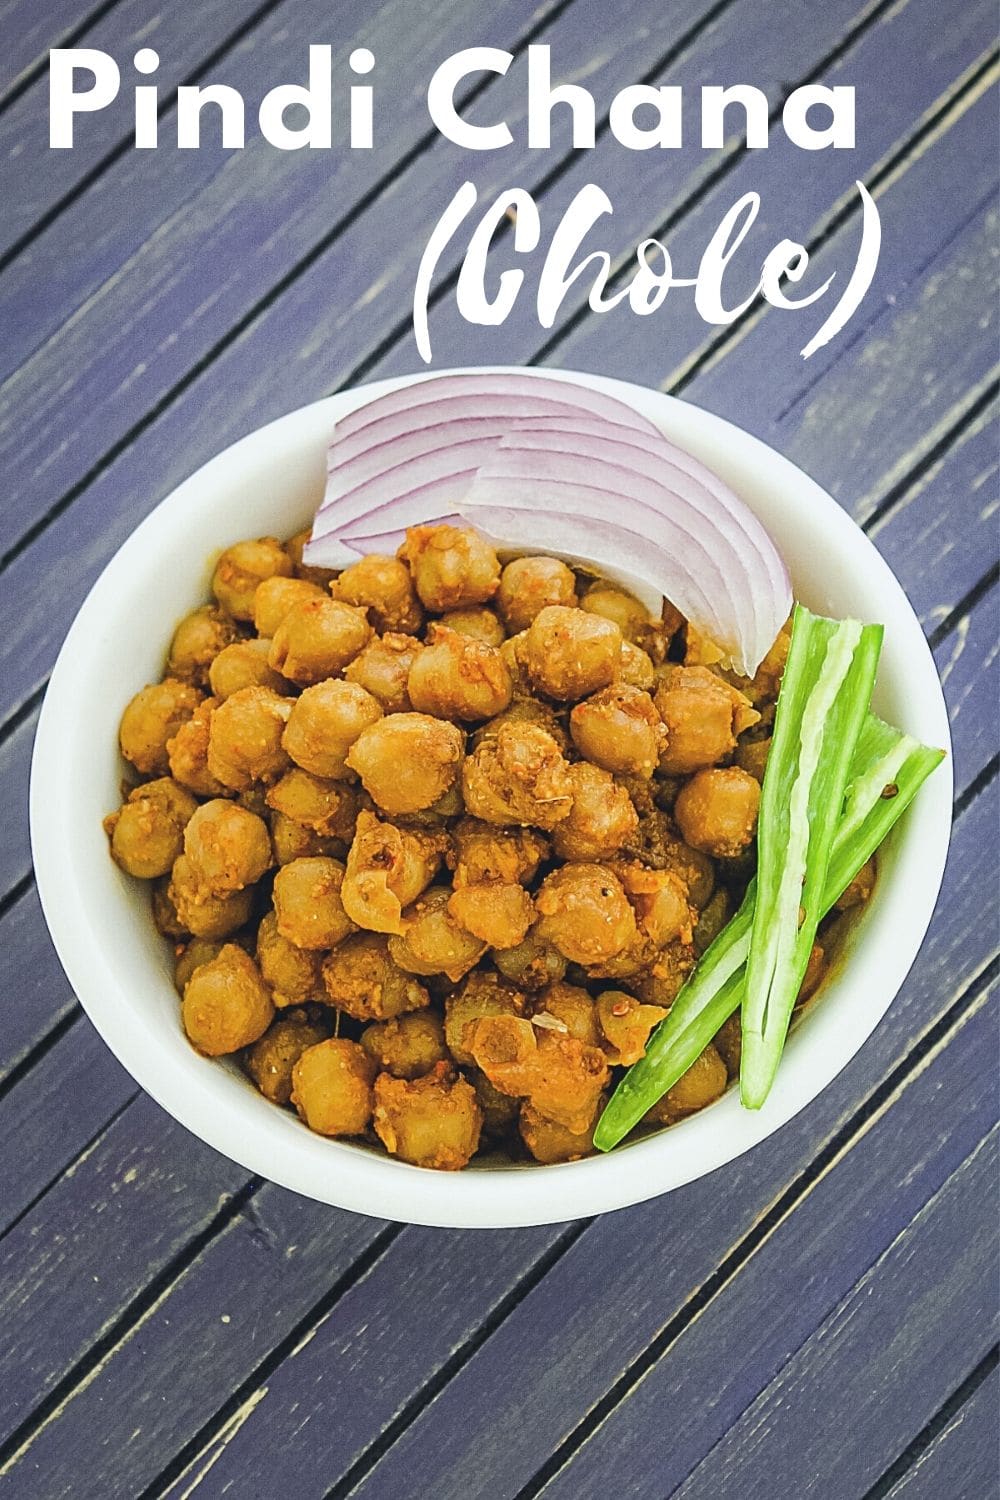 Pindi chana served with sliced onion, green chili with text on image for pinterest.